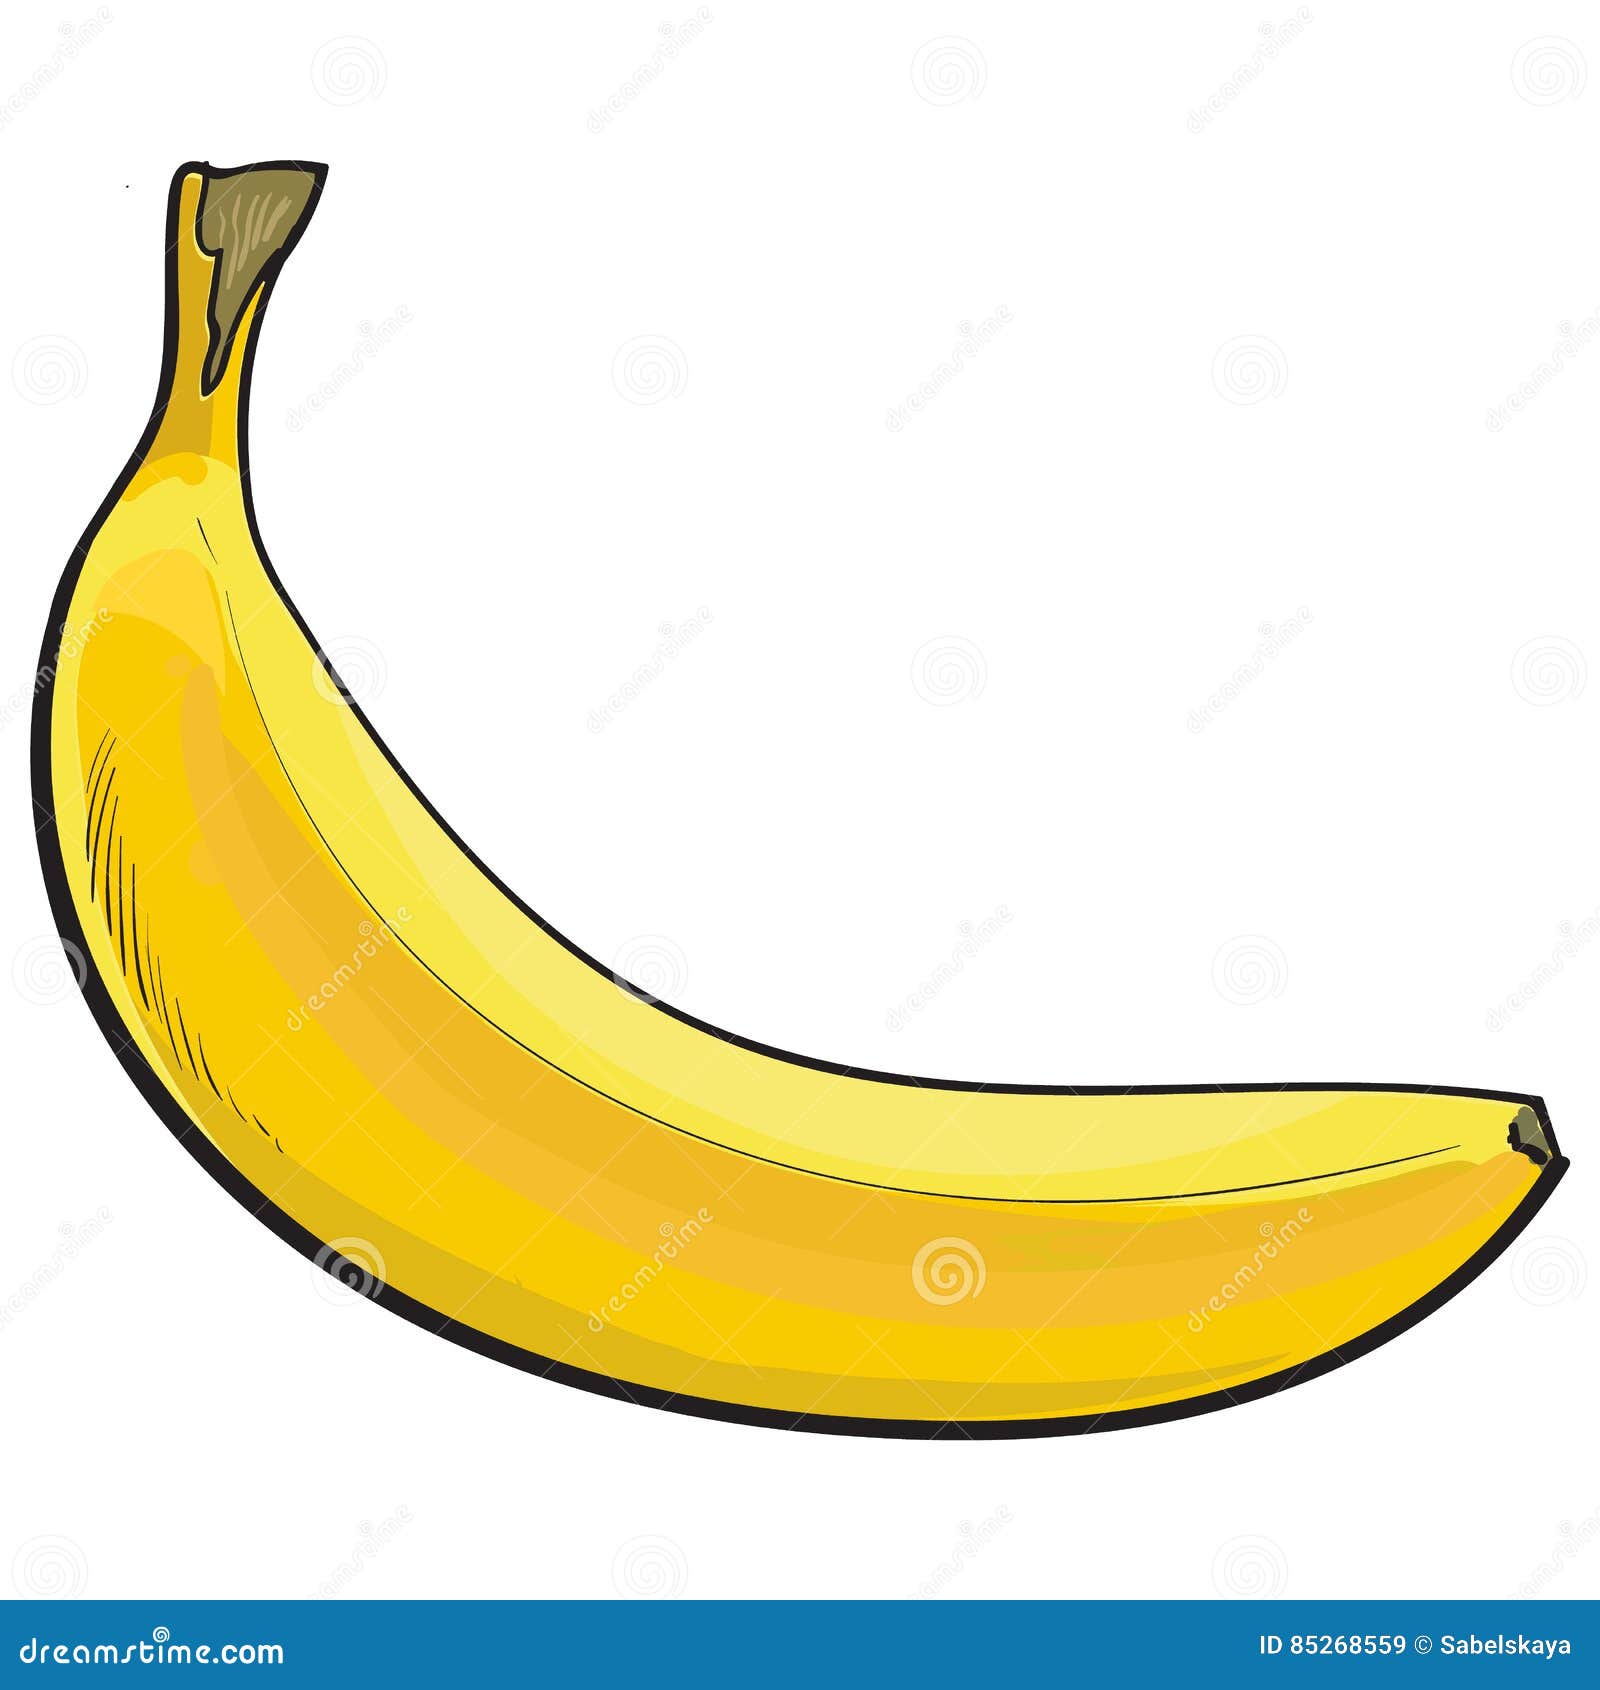 How to Draw a Banana for Kids - How to Draw Easy